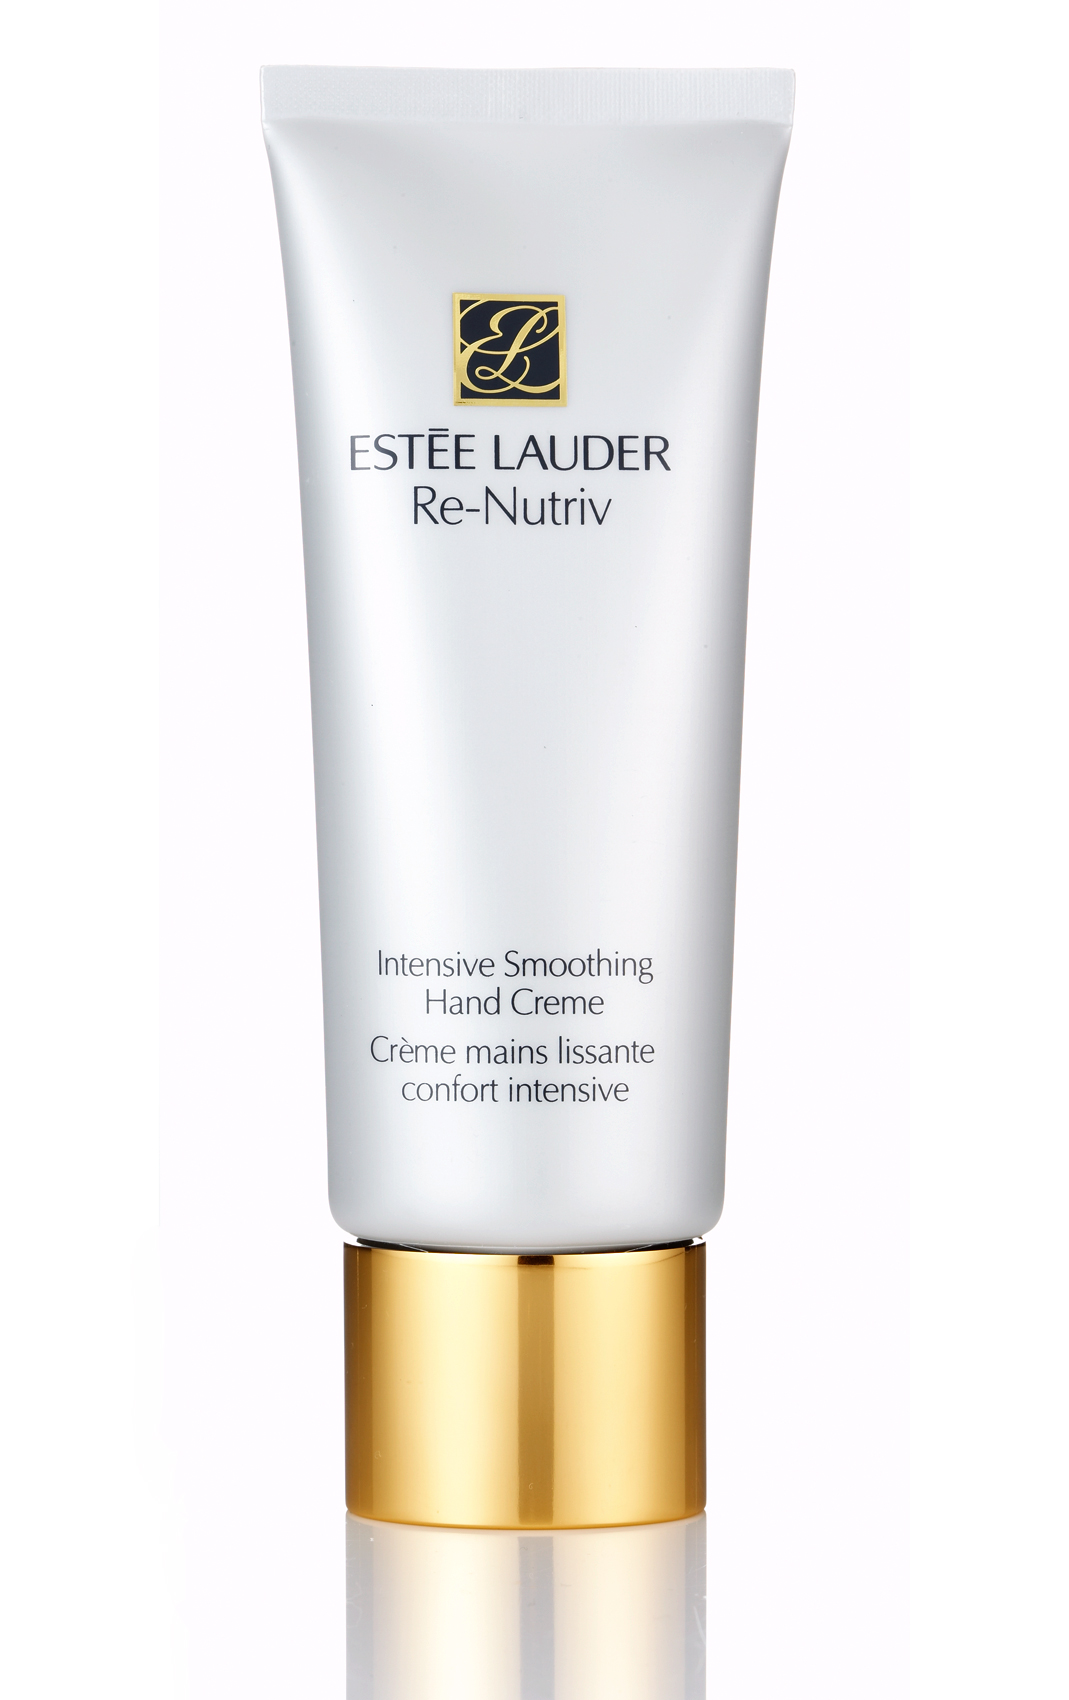 EsteeLauder Beauty and cosmetic product photography by Ylva Erevall